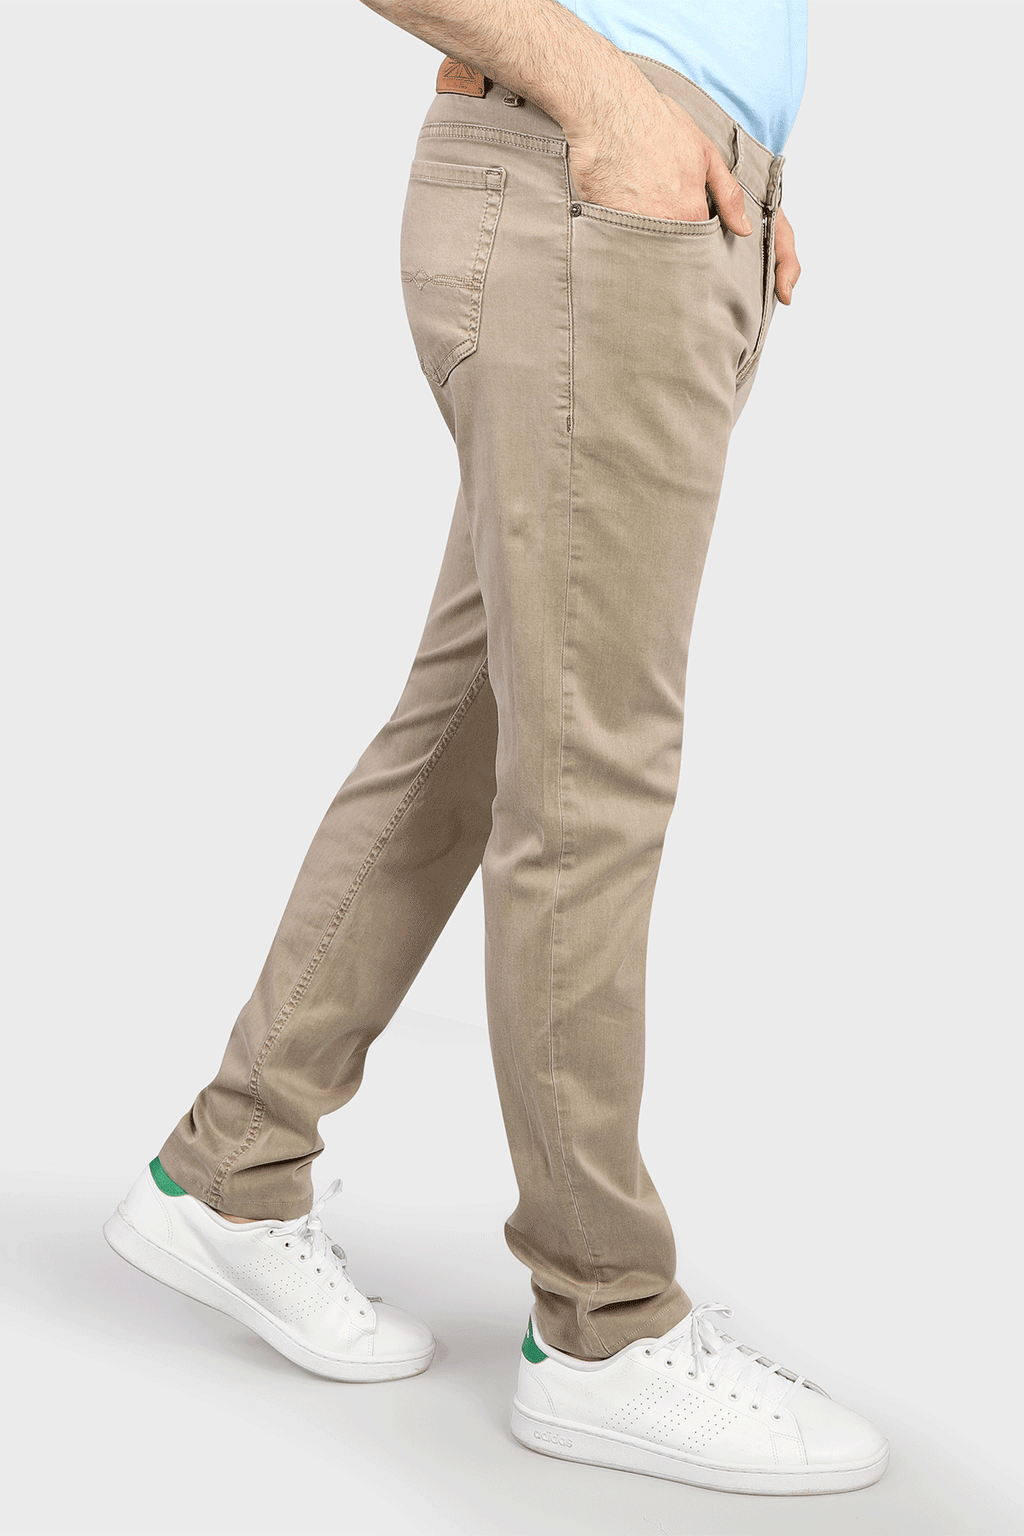 Five Pocket Stretch Pants in Oatmeal - 7 Downie St.®